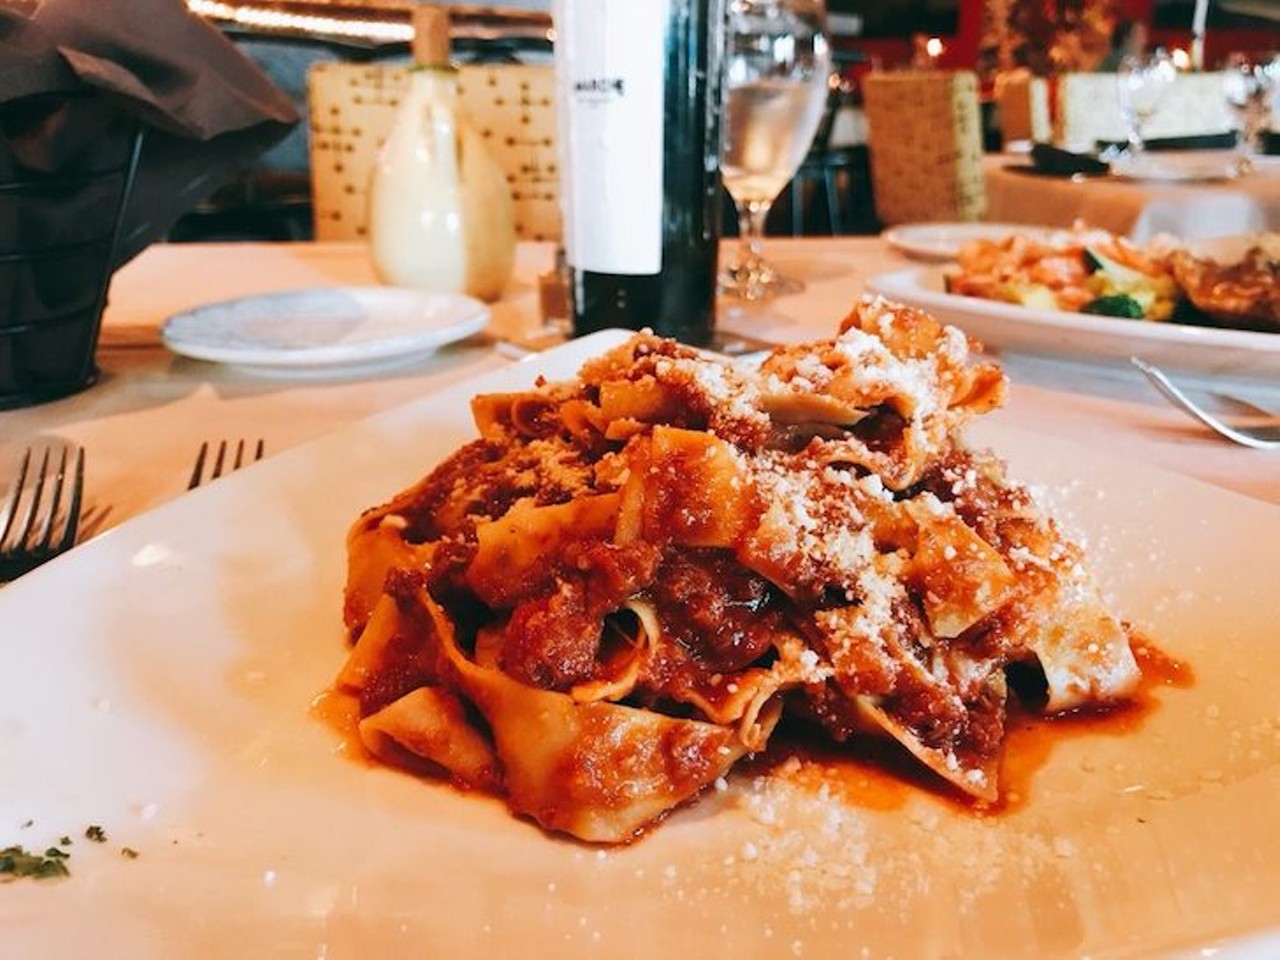 23. La Casa Della Pasta
5273 Ehrlich Rd., Tampa, (813) 961-1012
&#147;The food at Cena is really good. It's off the beaten path and flies below the Tampa food radar but is definitely one of the best restaurants in town.&#148;- Jammie S.
Photo via Christina G./Yelp